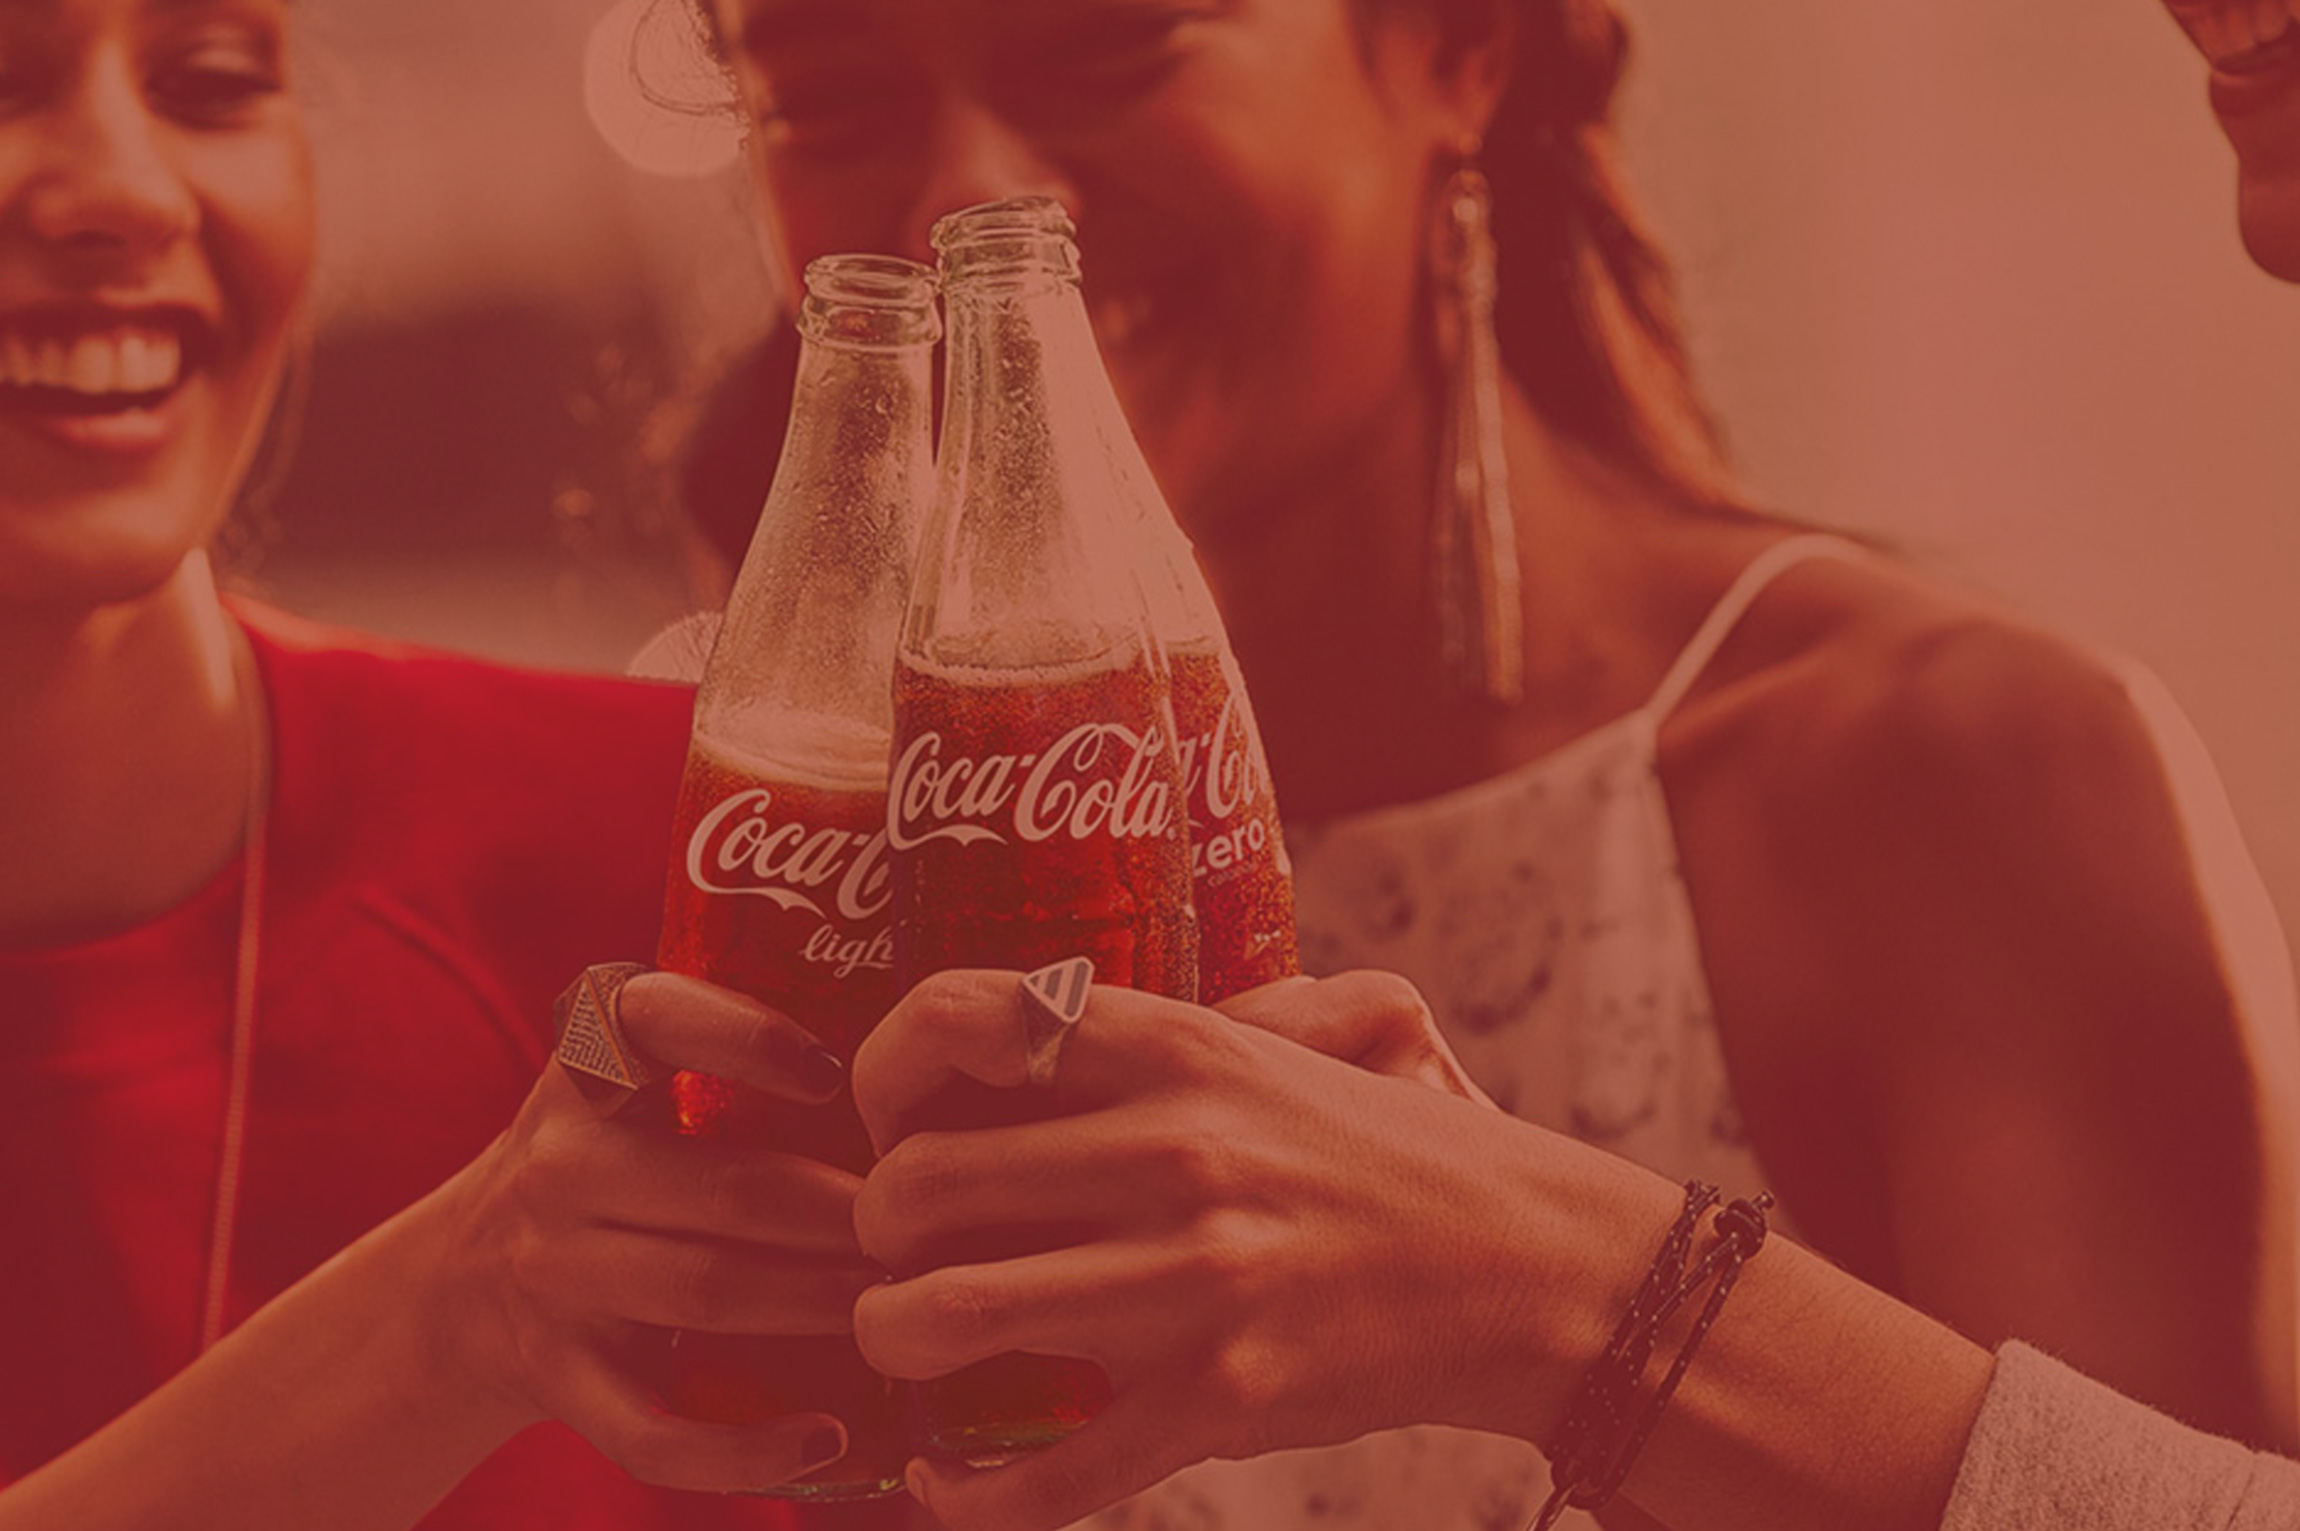 Cheers with Coca-cola